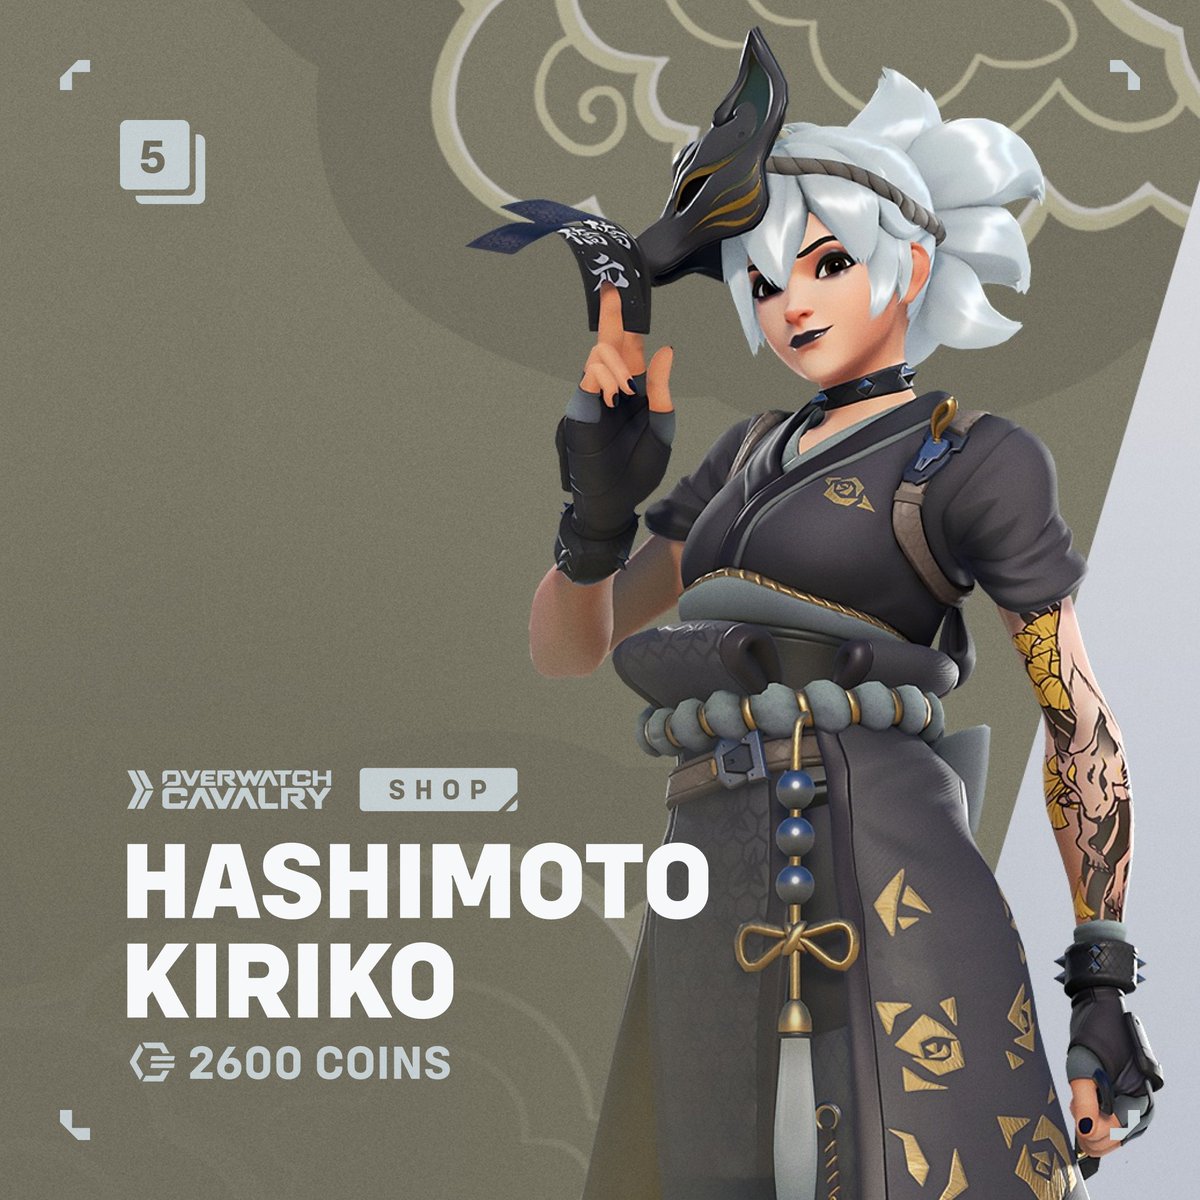 New #Overwatch2 Featured Shop Bundle: Hashimoto Kiriko 🐯
 
🛒 Available in-game now for 2600 Overwatch Coins.